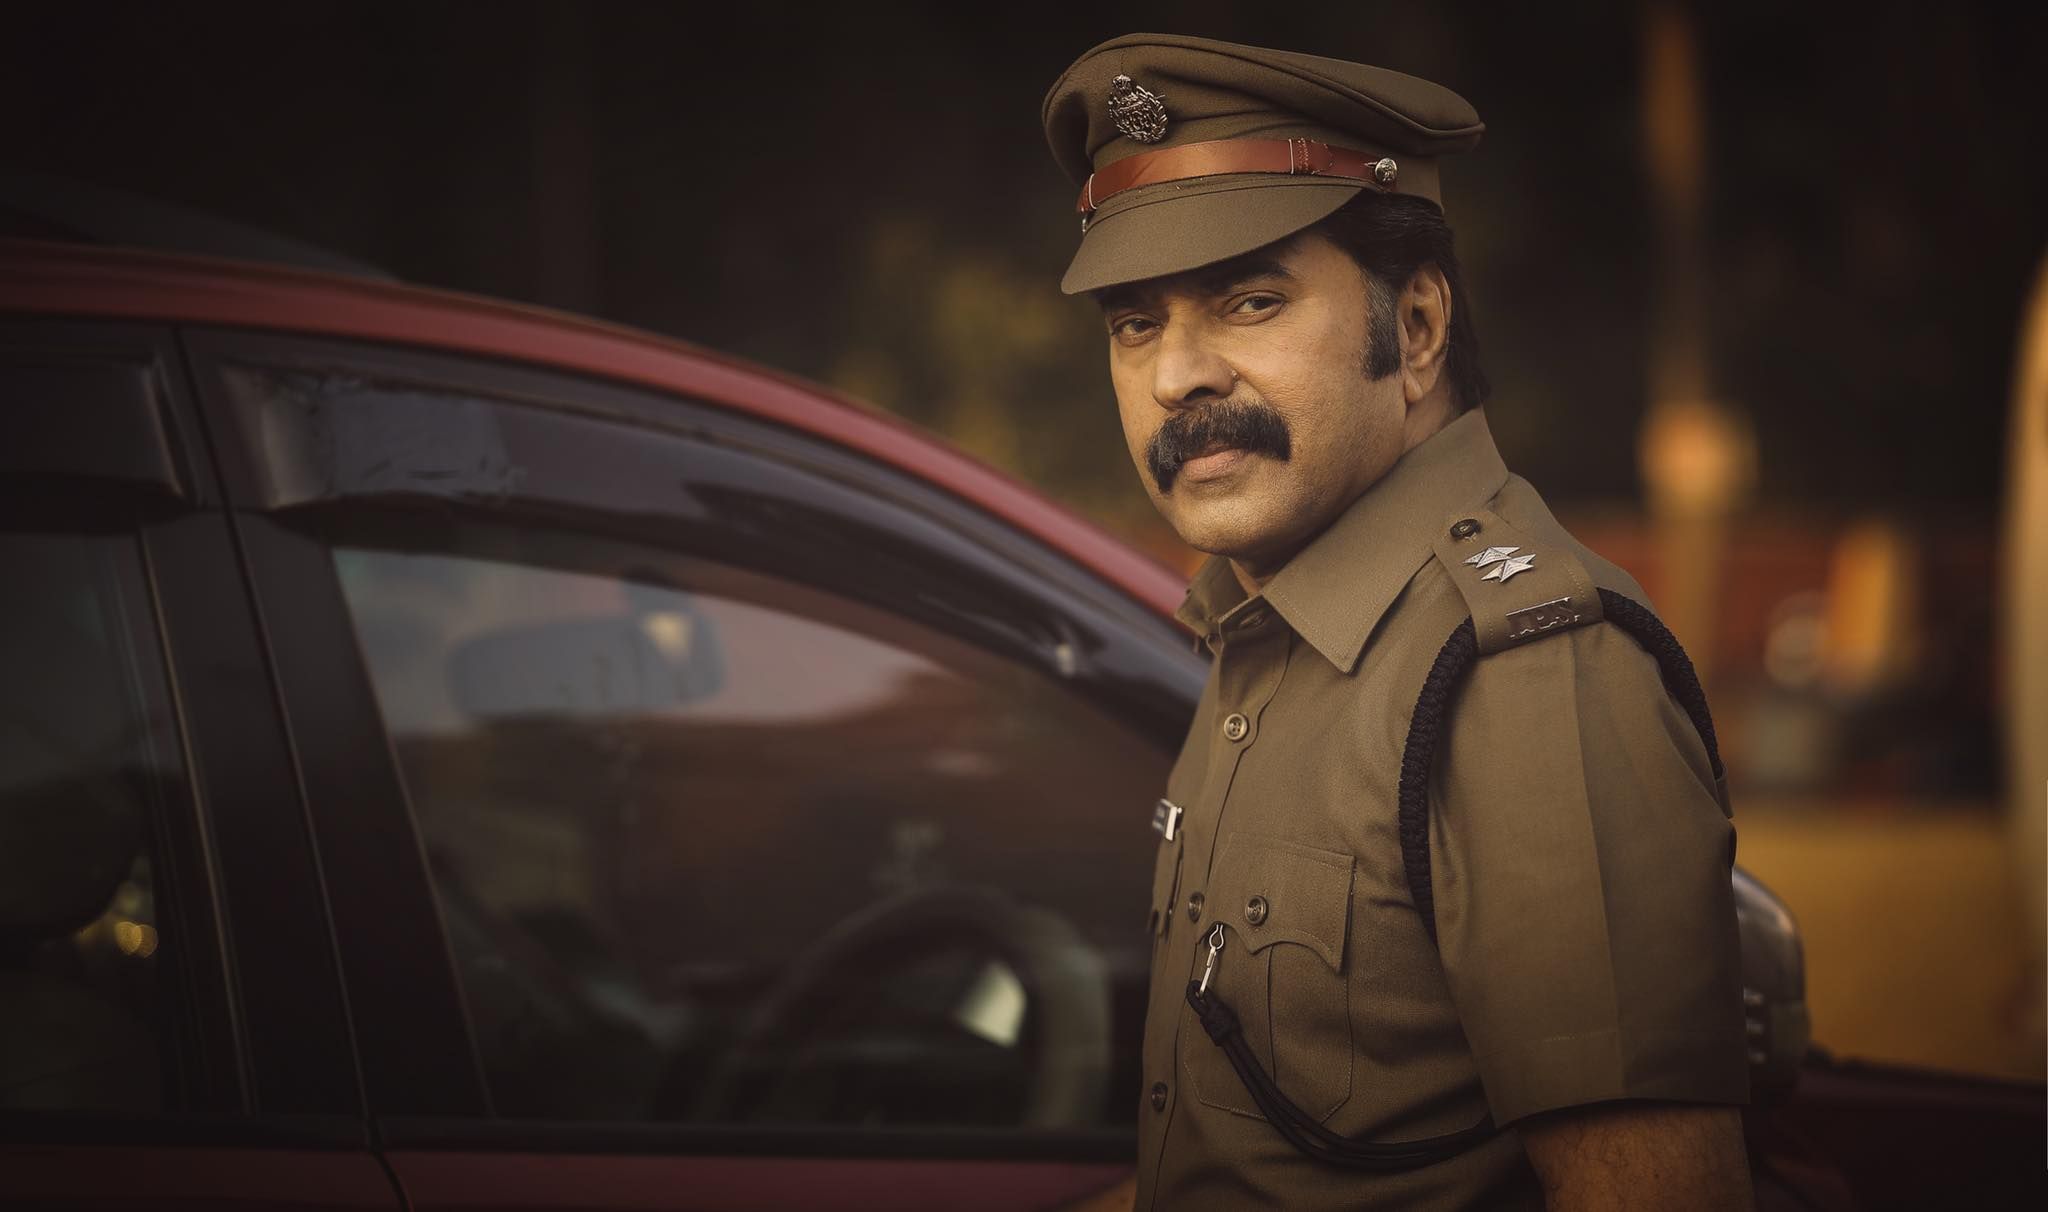 Mammootty Handsome Pictures And HD Wallpapers - IndiaWords.com